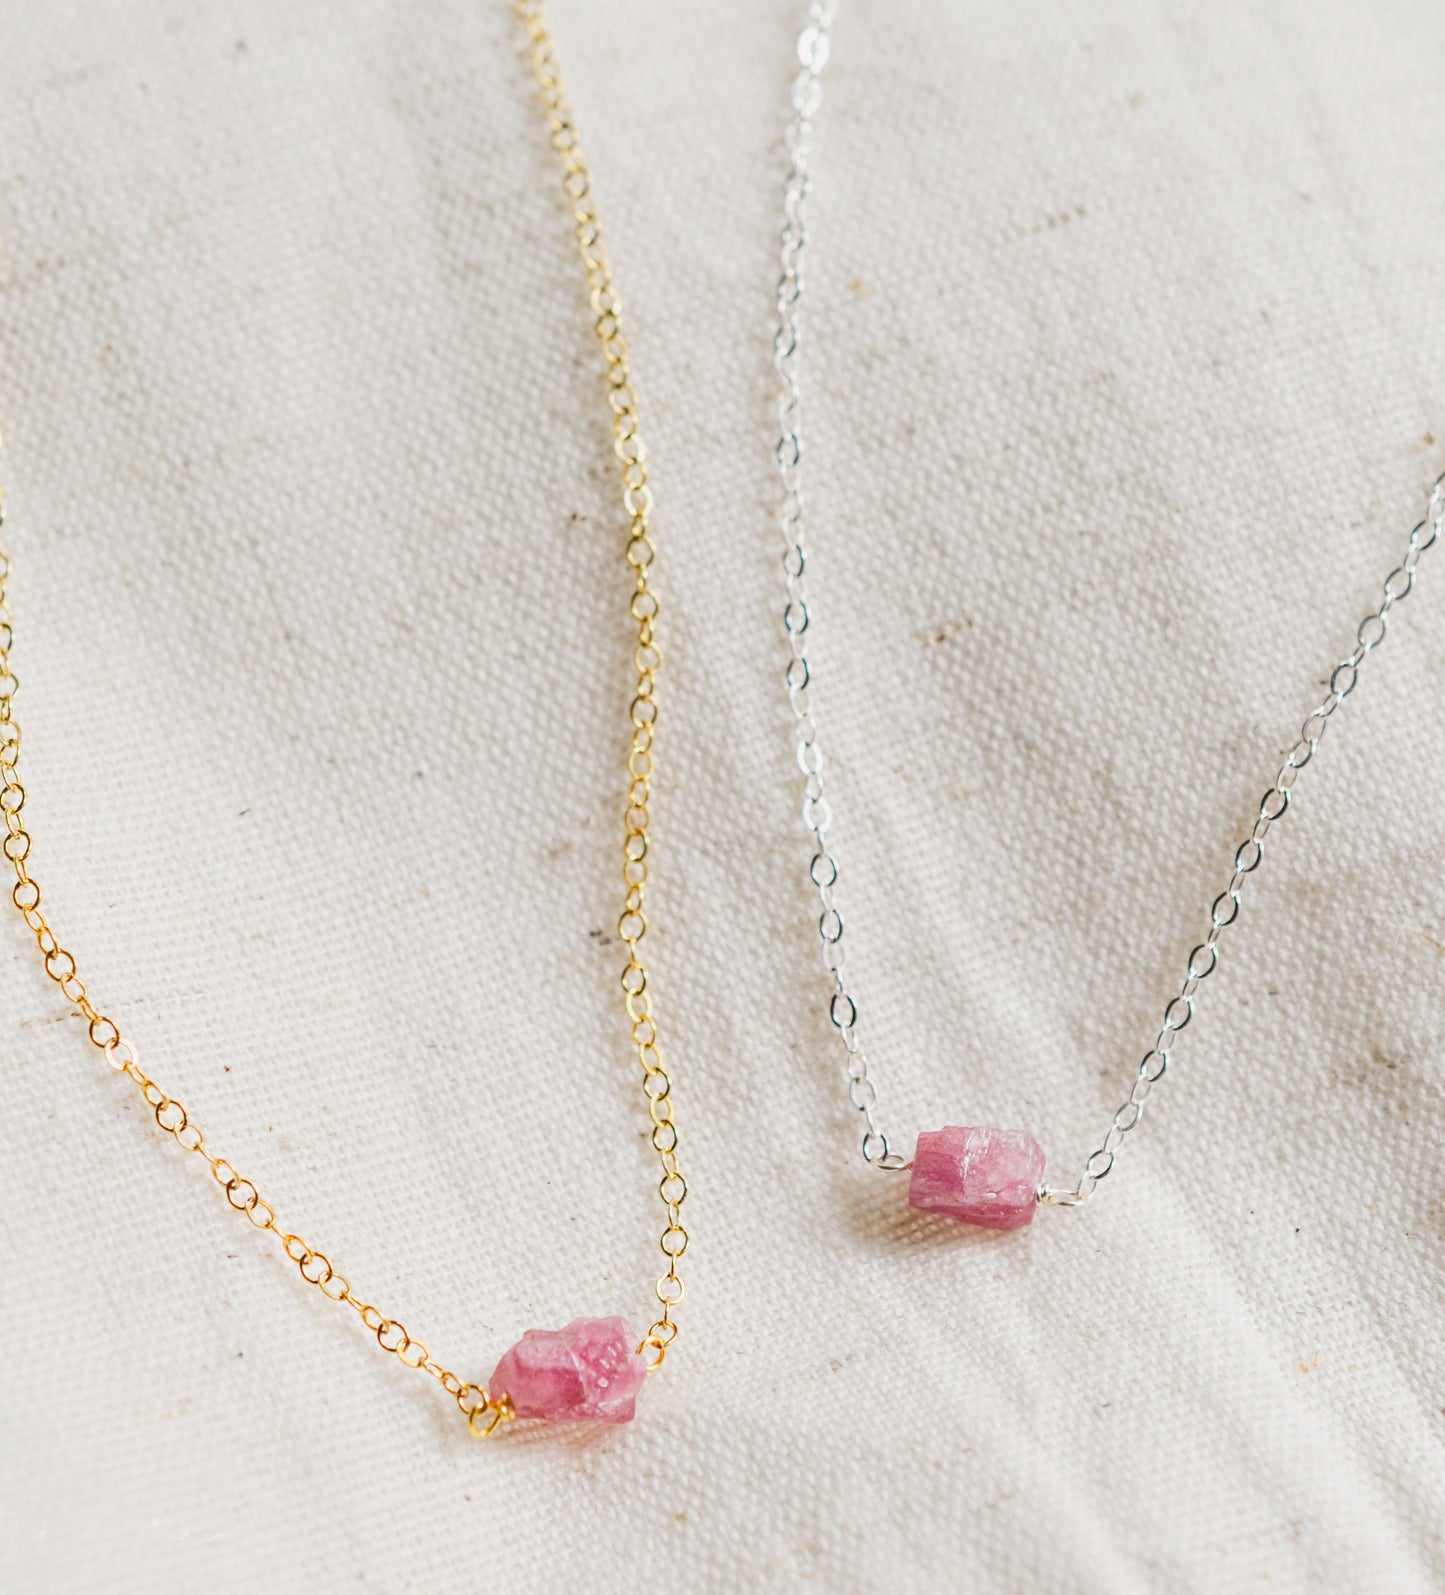 Small natural pink tourmaline crystal set onto a sterling silver or 14k gold filled chain. 